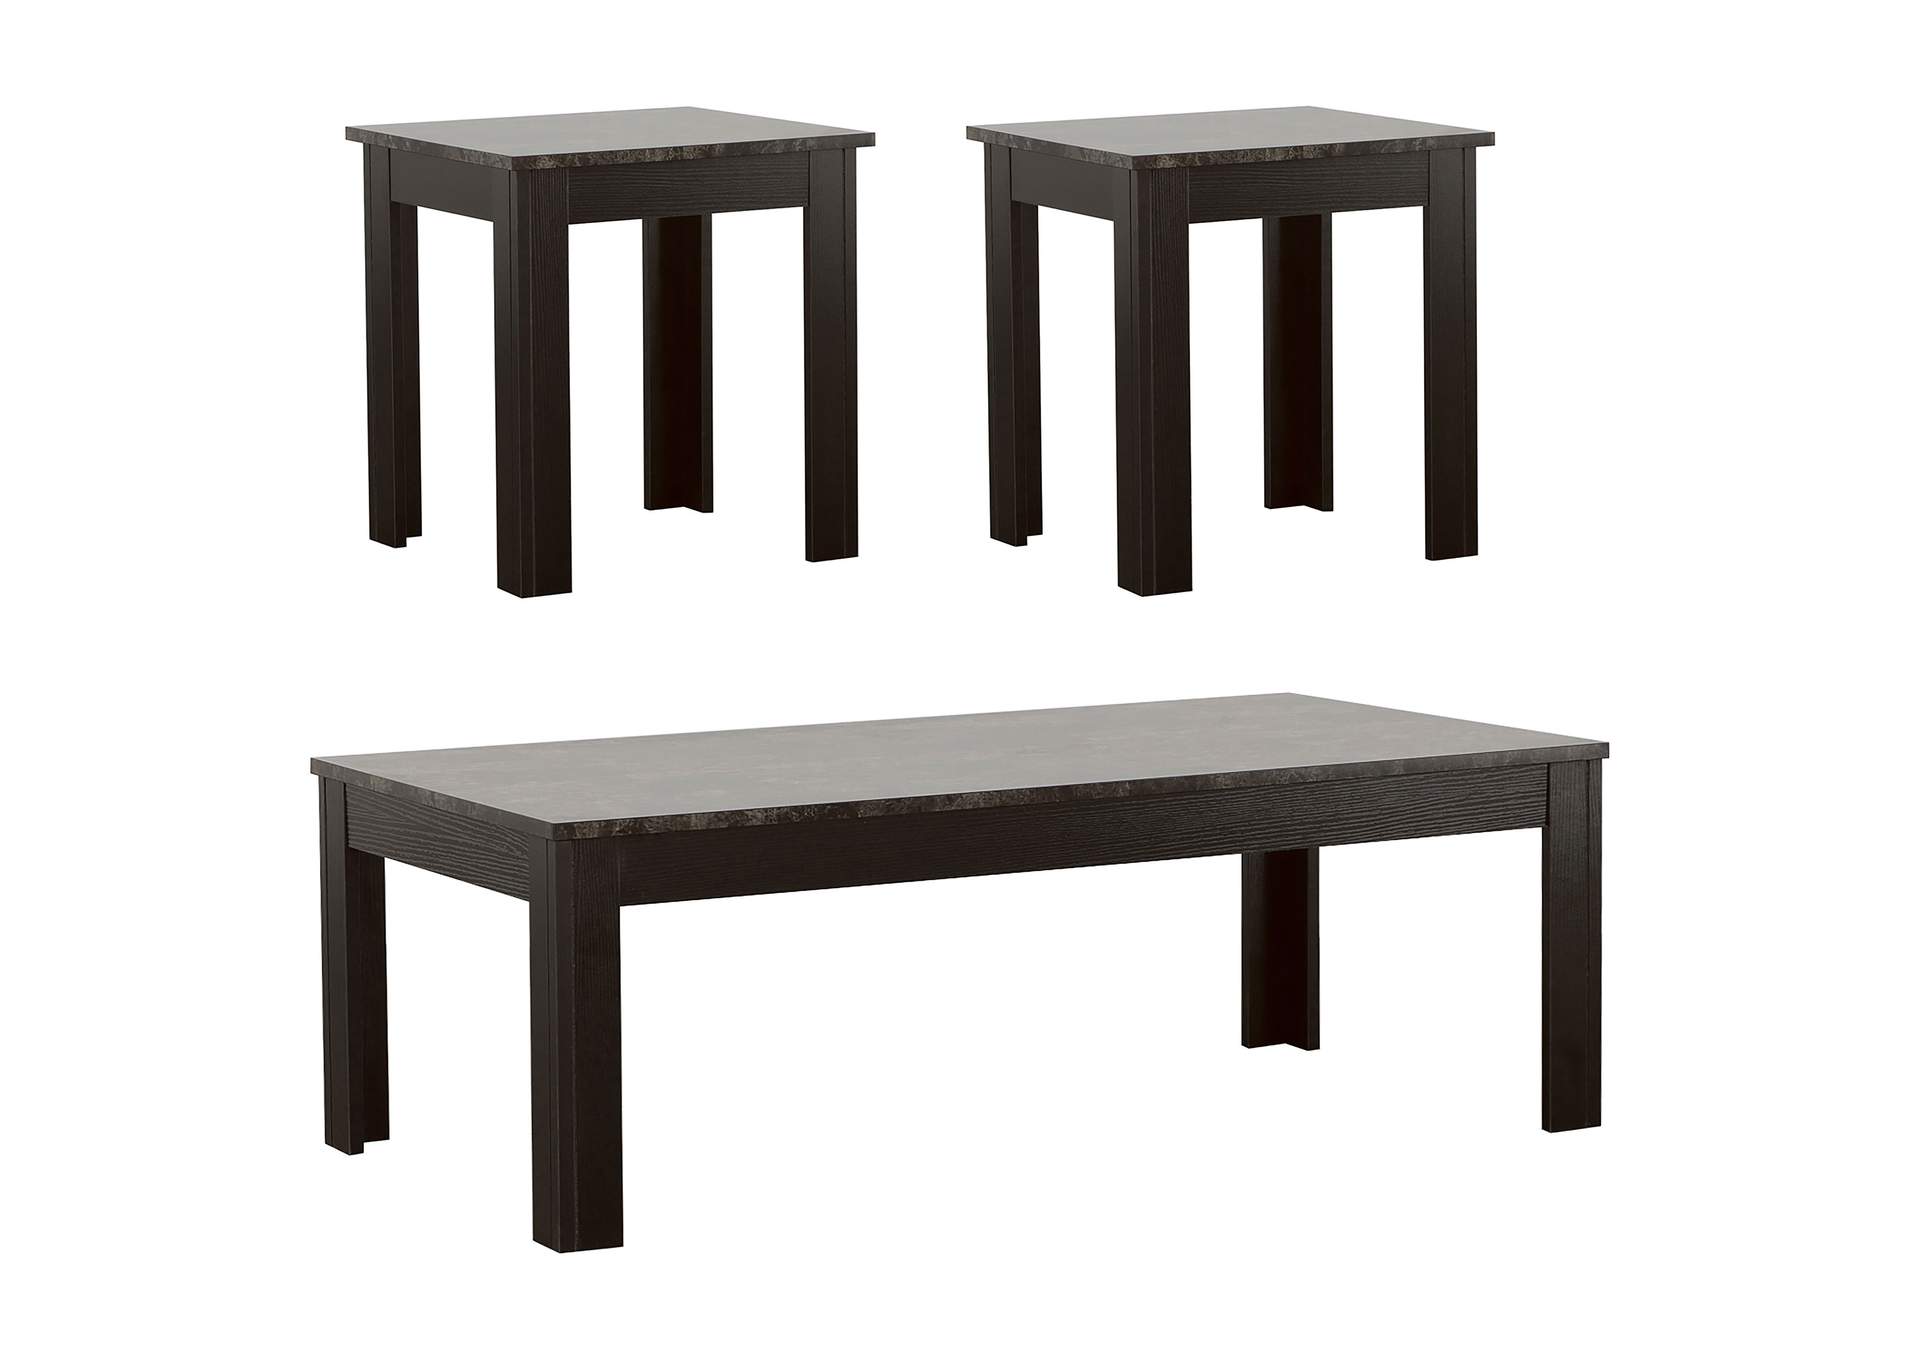 Silas 3-piece Faux-marble Top Occasional Table Set Black,Coaster Furniture